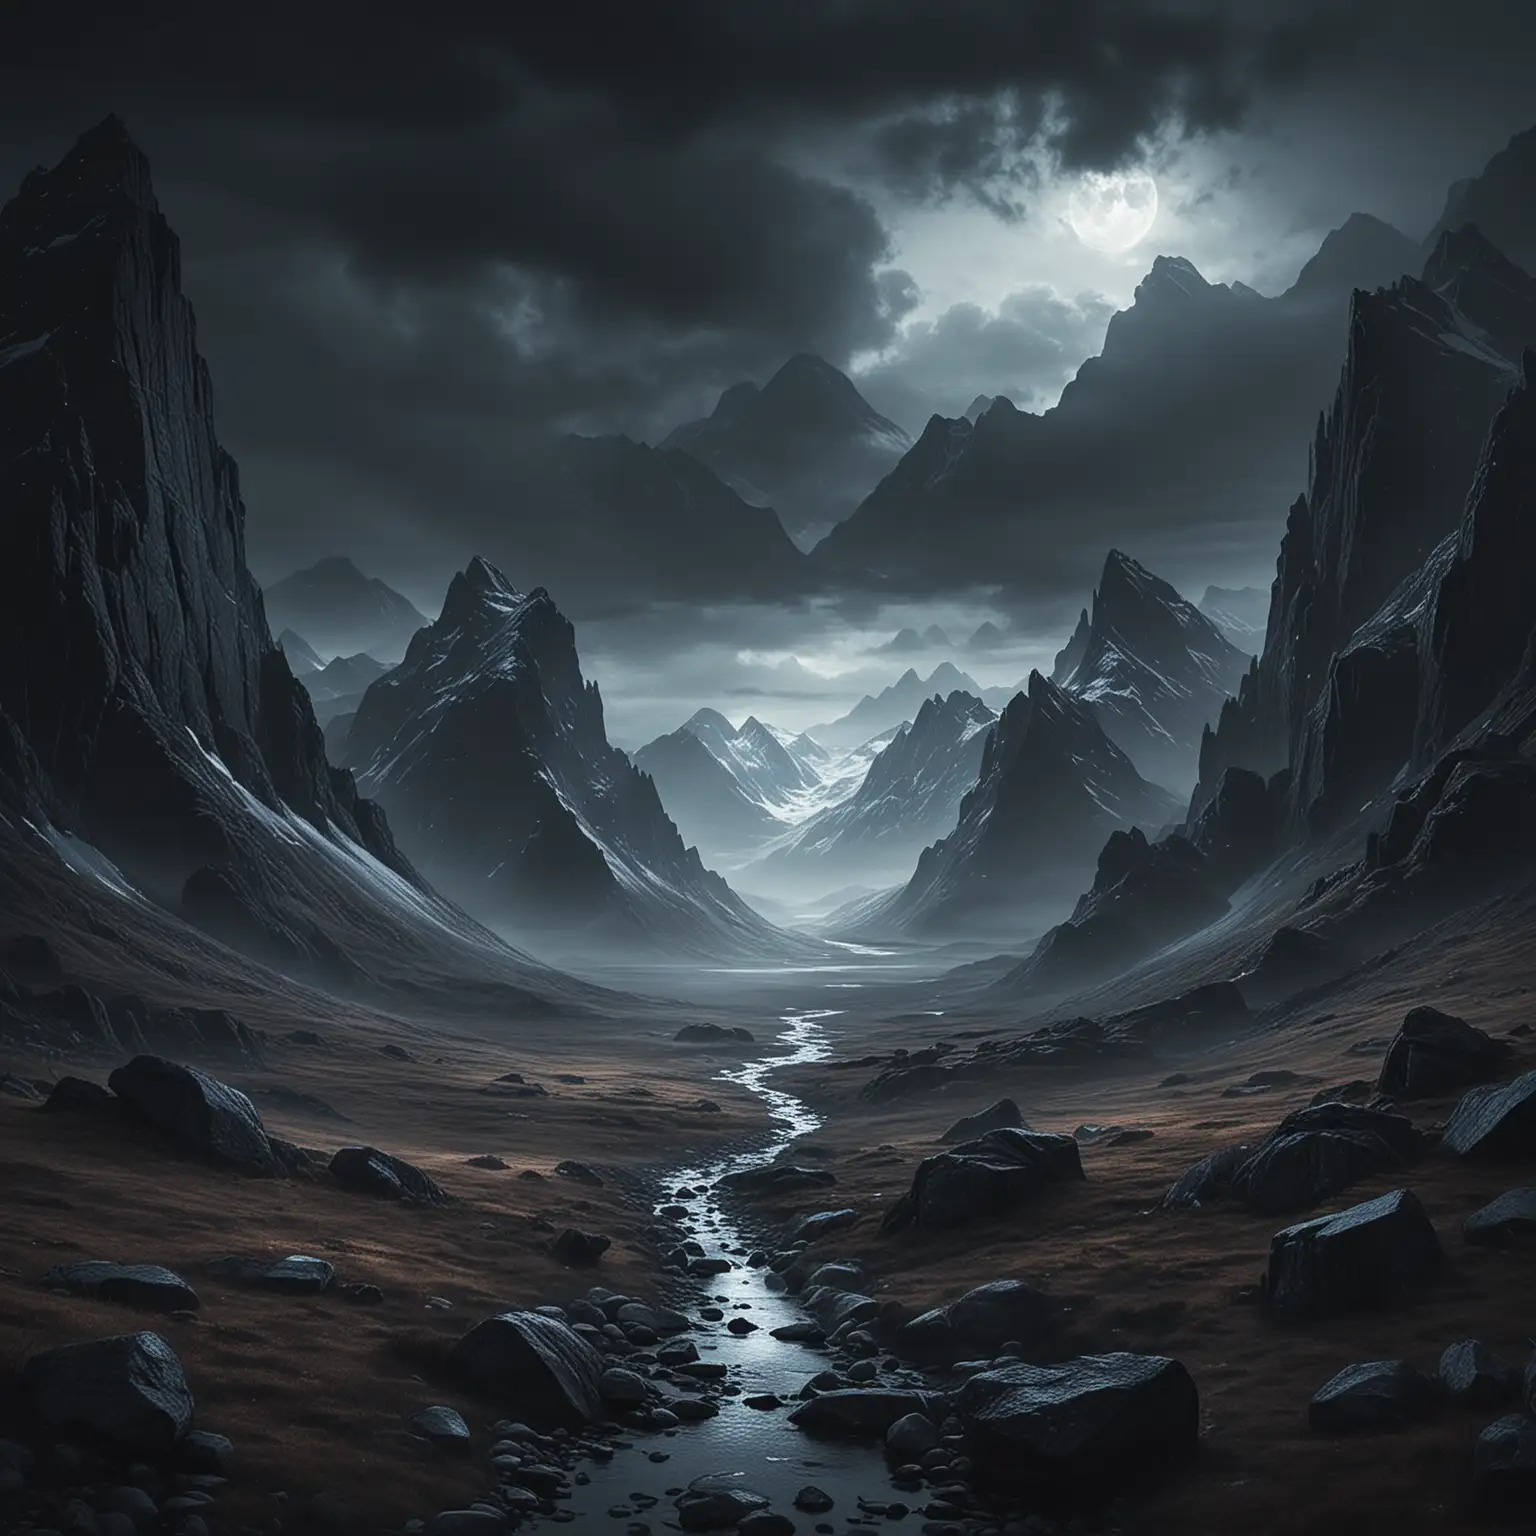 Mystical Dark Nordic Fantasy Landscape with Towering Mountains